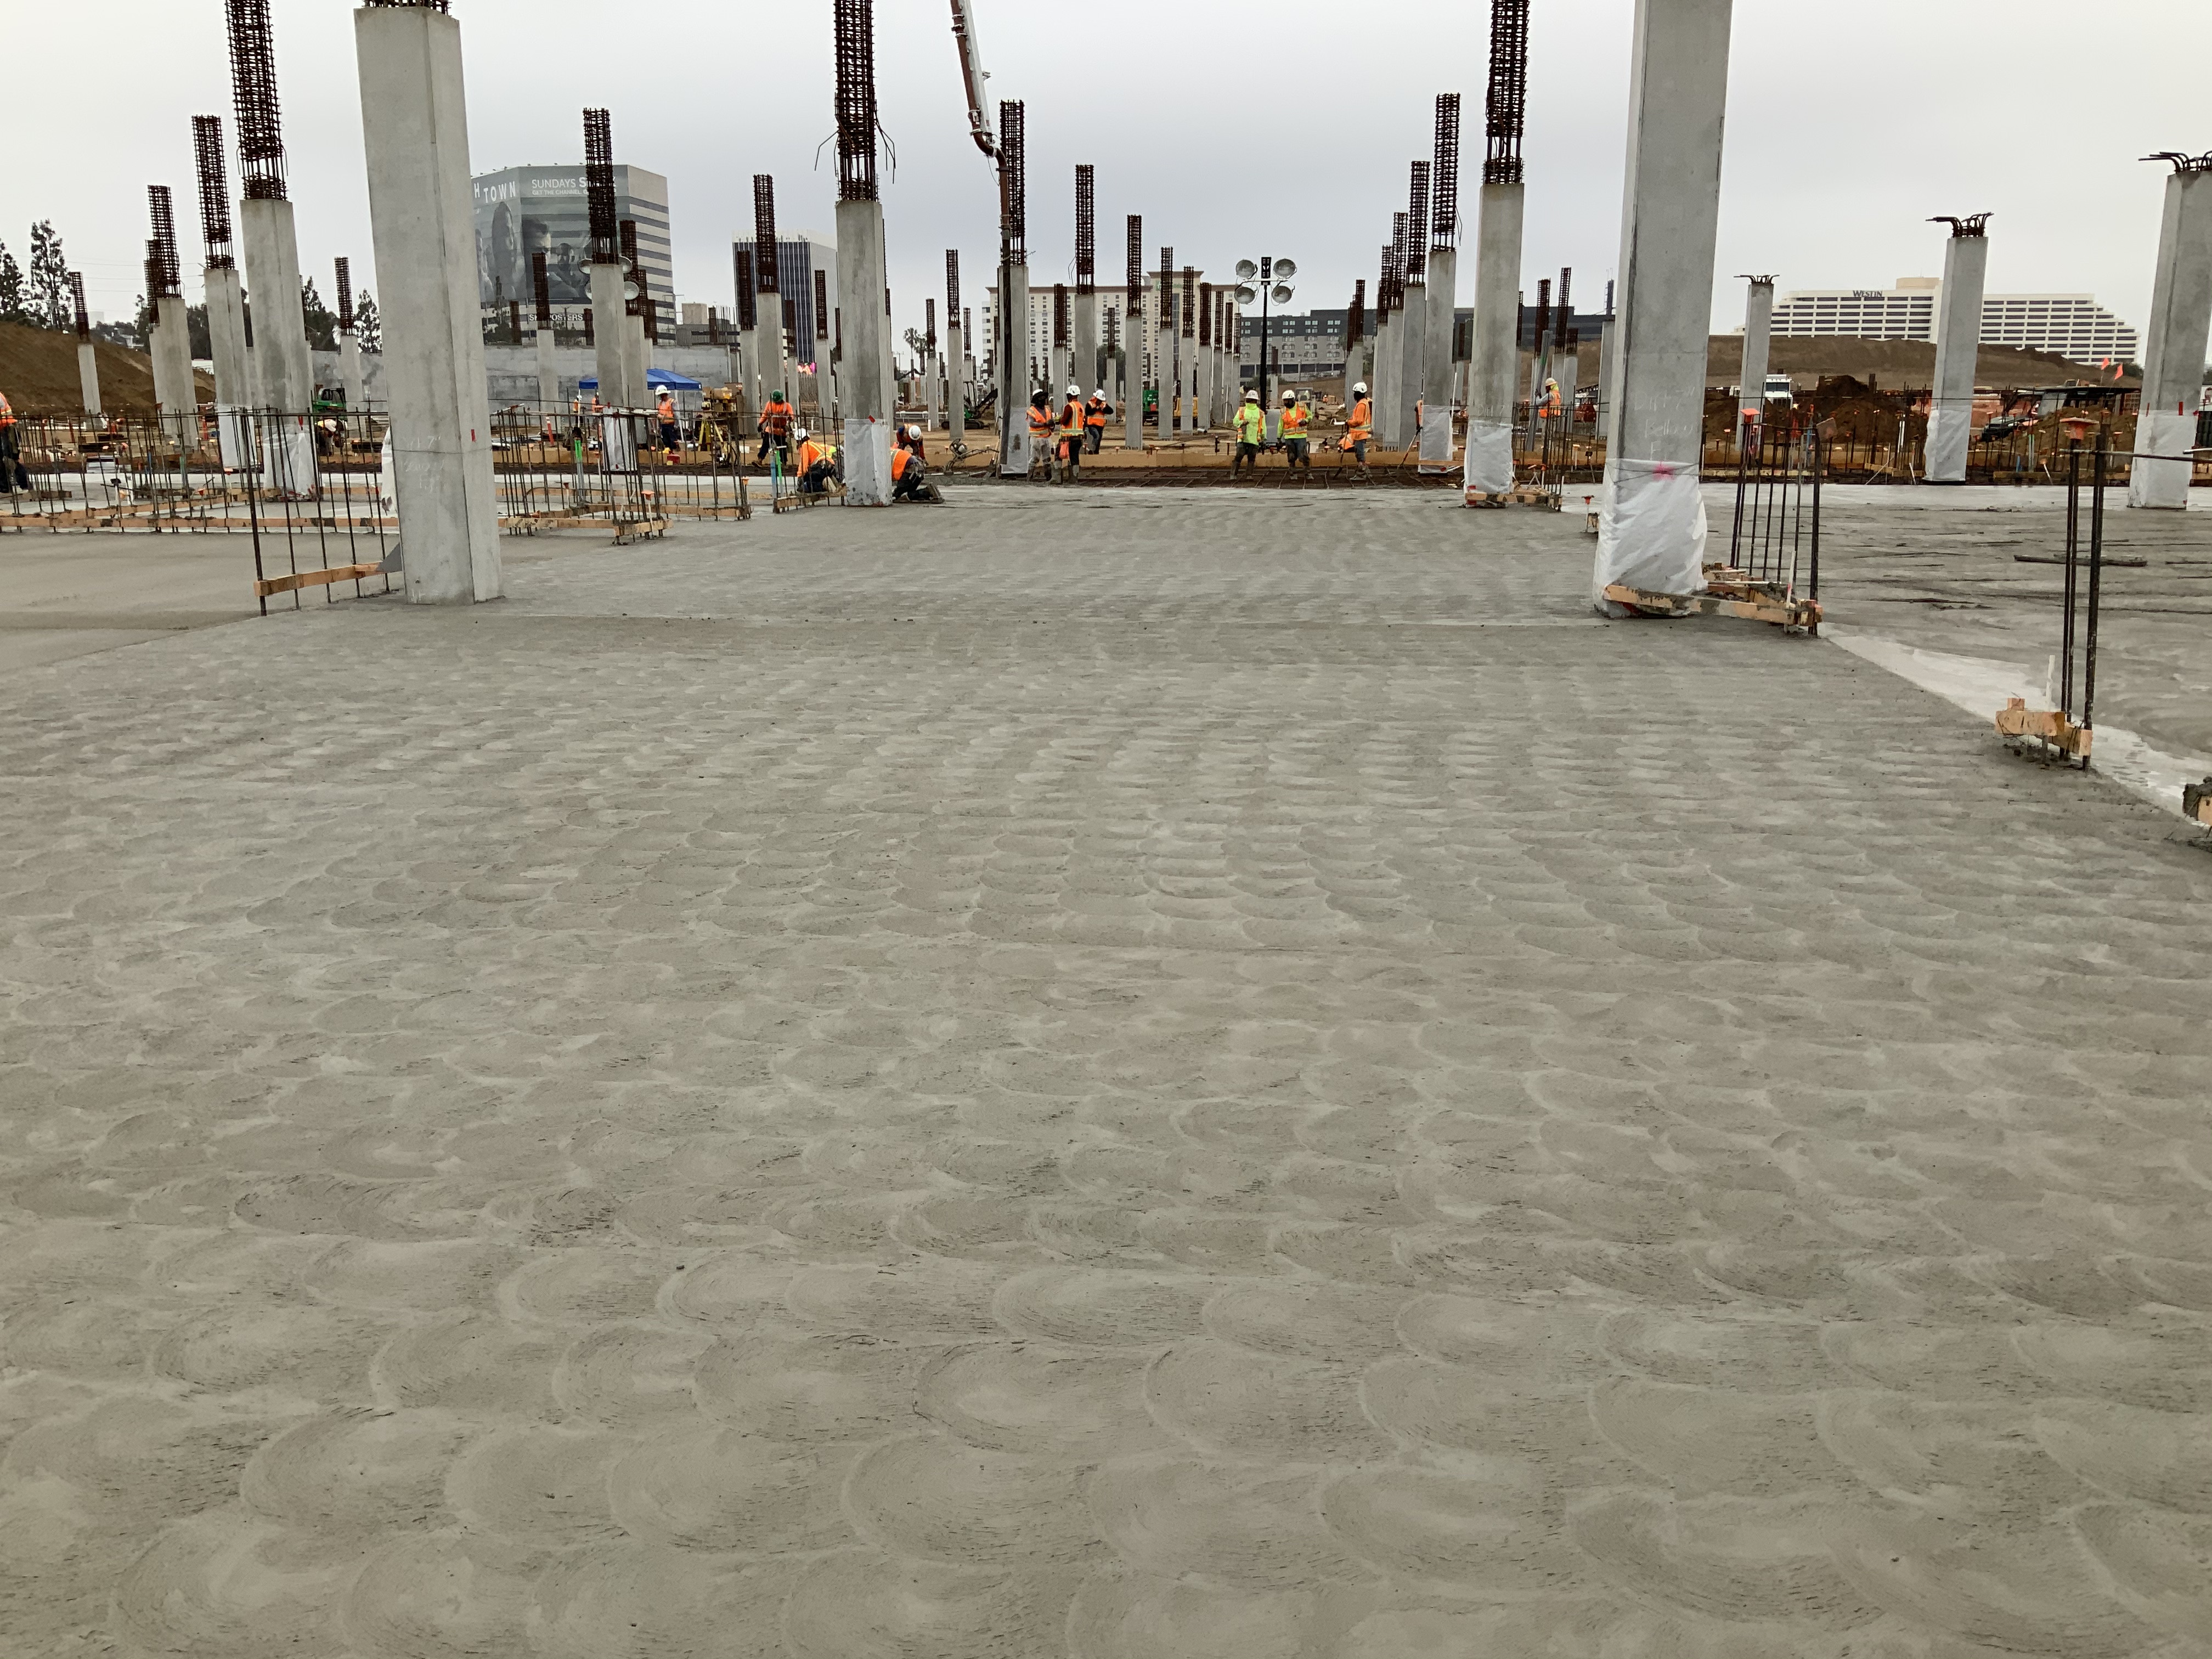 The finished product after the first slab-on-grade pour at the Consolidated Rent-A-Car facility site.